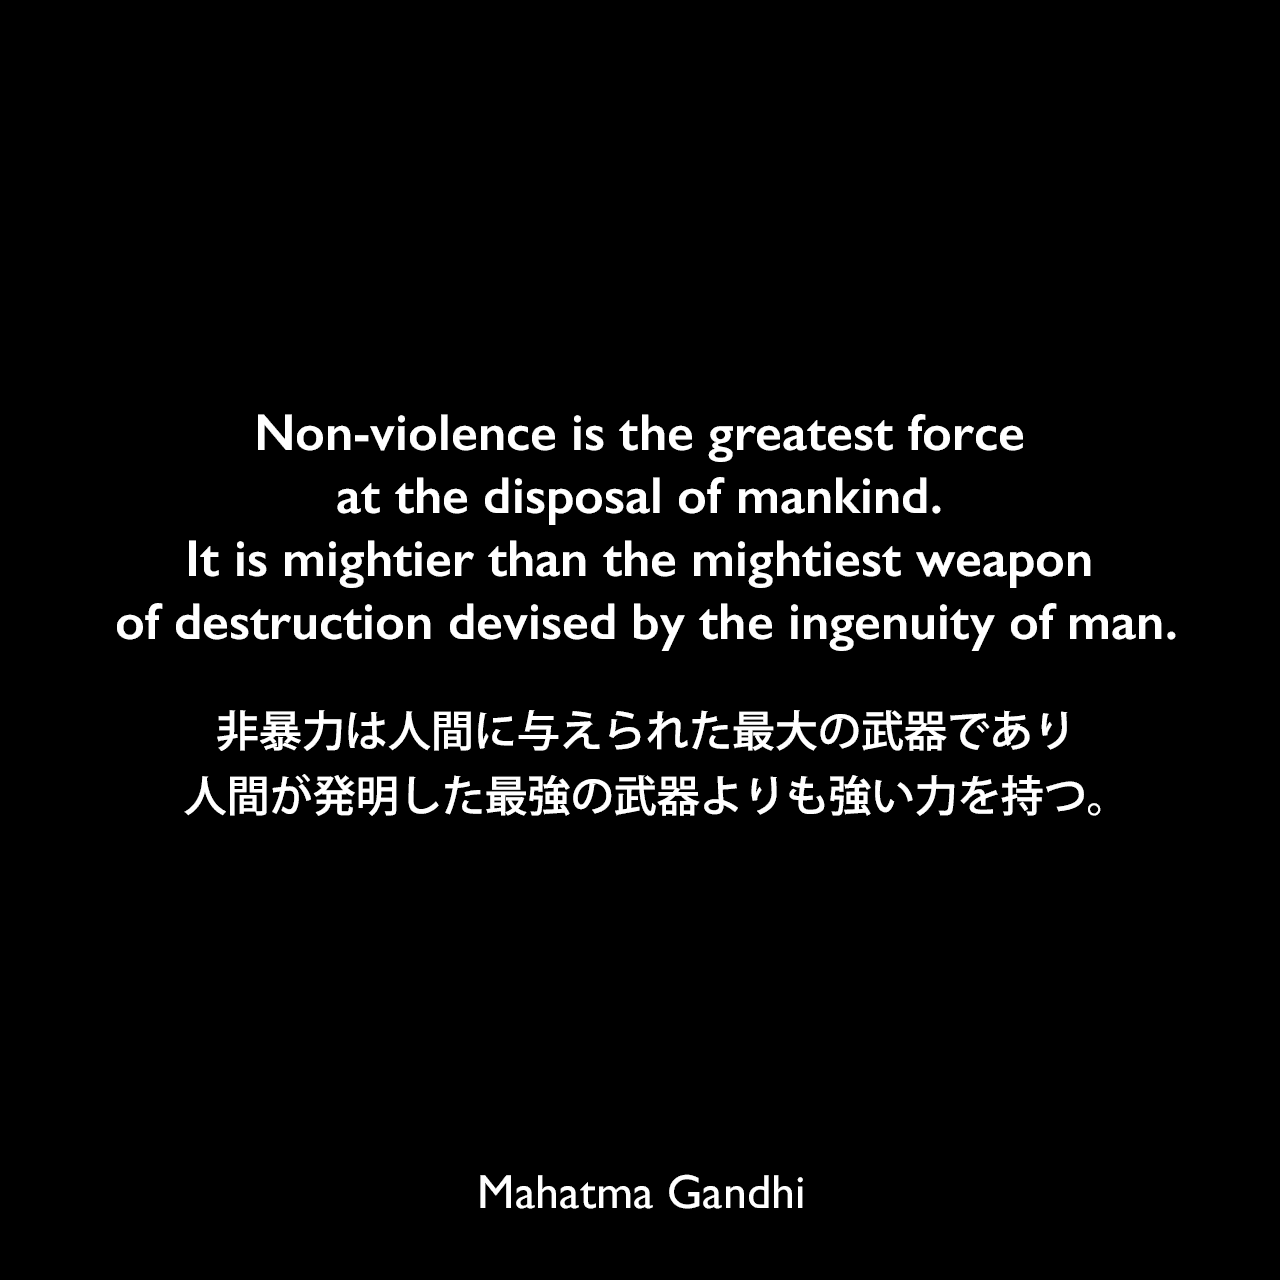 Non-violence is the greatest force at the disposal of mankind. It is mightier than the mightiest weapon of destruction devised by the ingenuity of man.非暴力は人間に与えられた最大の武器であり、人間が発明した最強の武器よりも強い力を持つ。Mahatma Gandhi